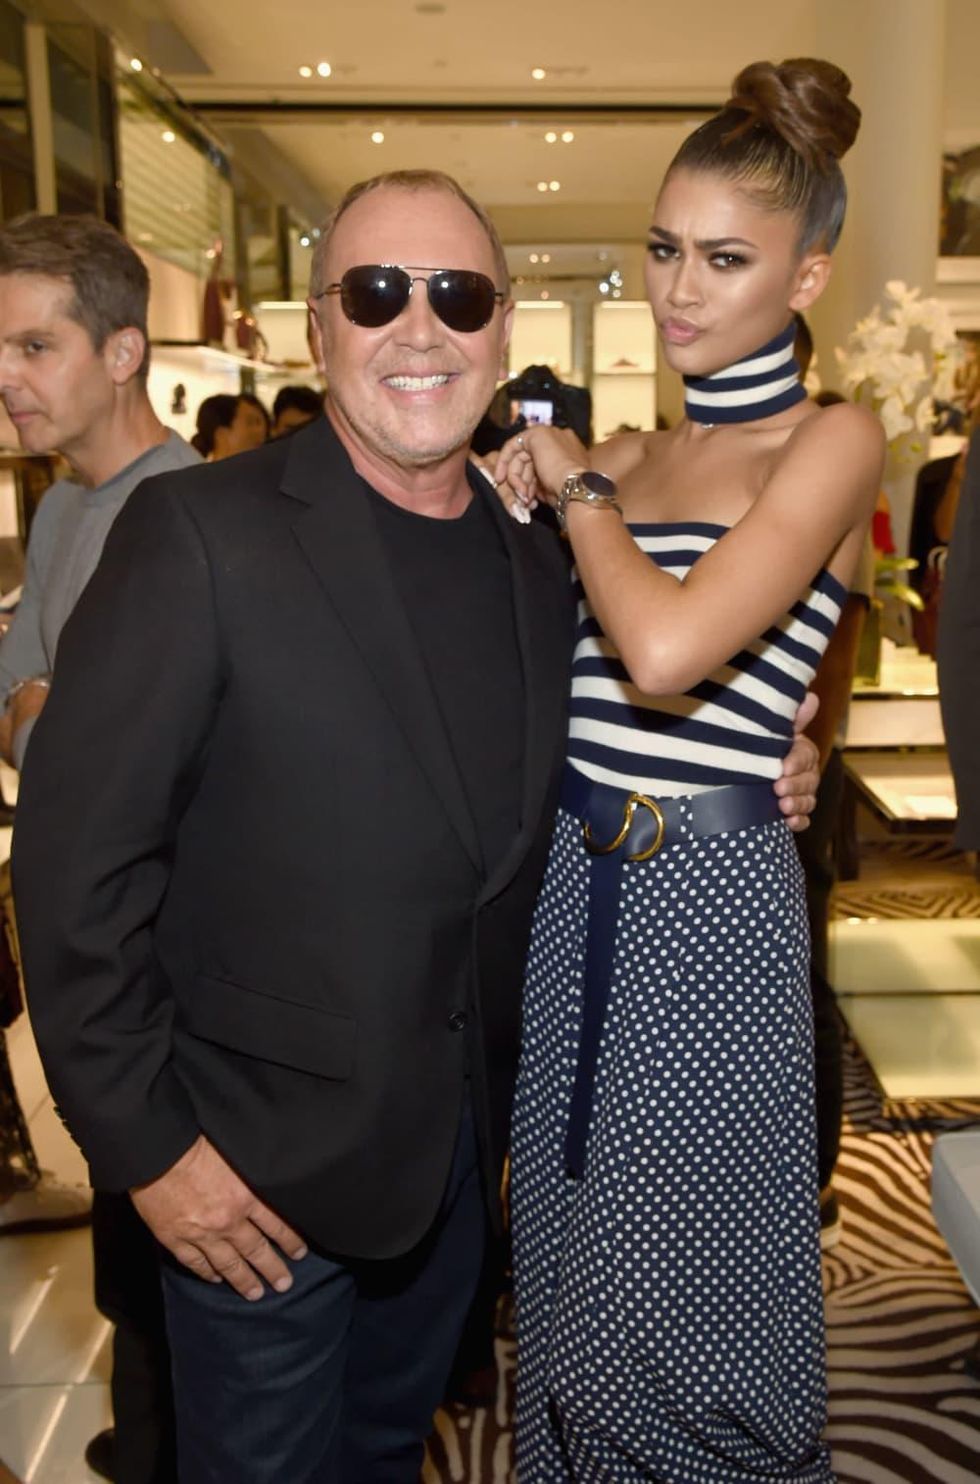 Zendaya and Michael Kors at watch launch party